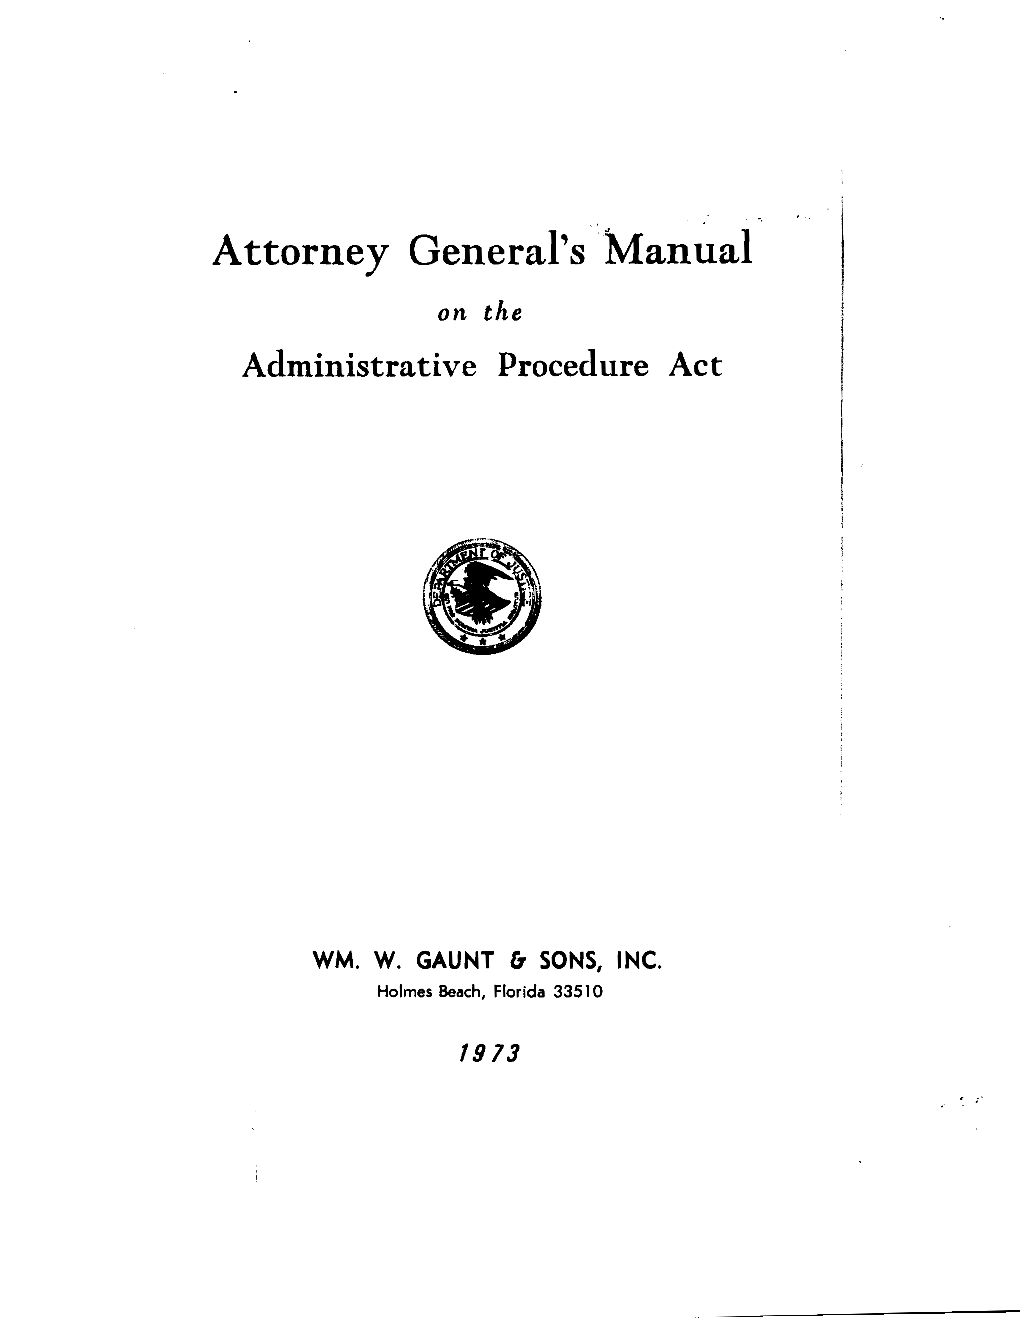 Attorney General's Manual on The